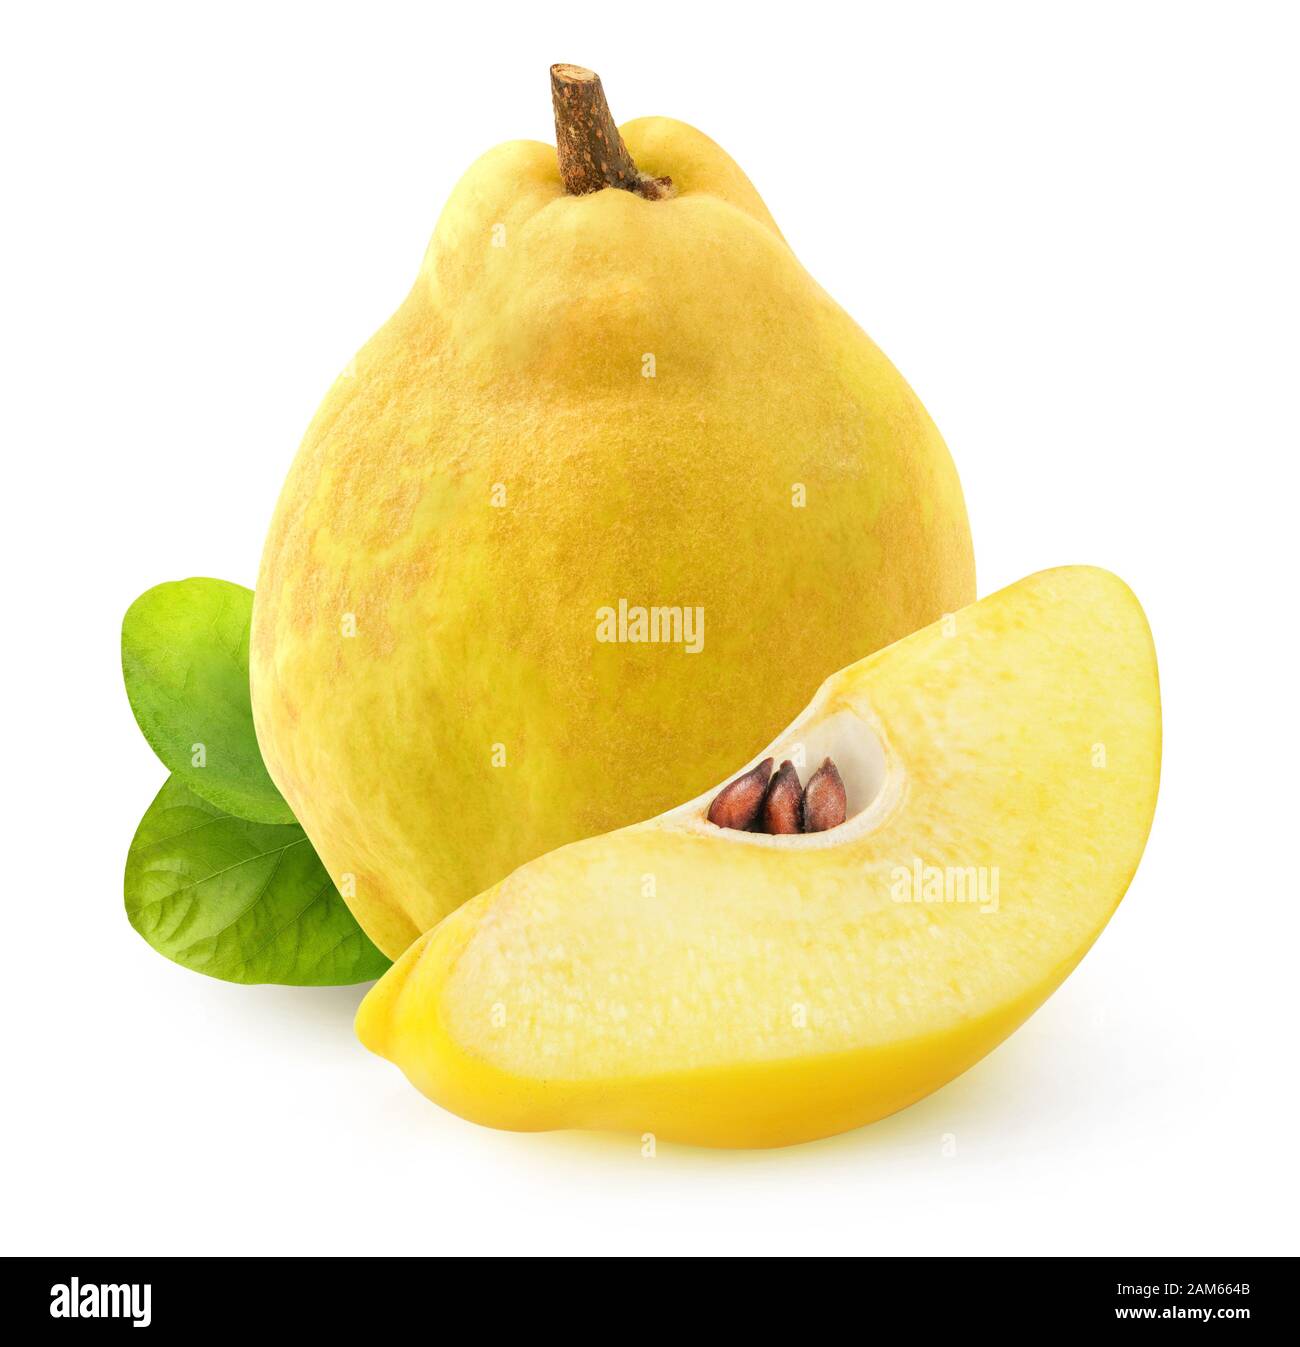 Isolated quince. One whole quince fruit and a wedge isolated on white backfround with clipping path Stock Photo